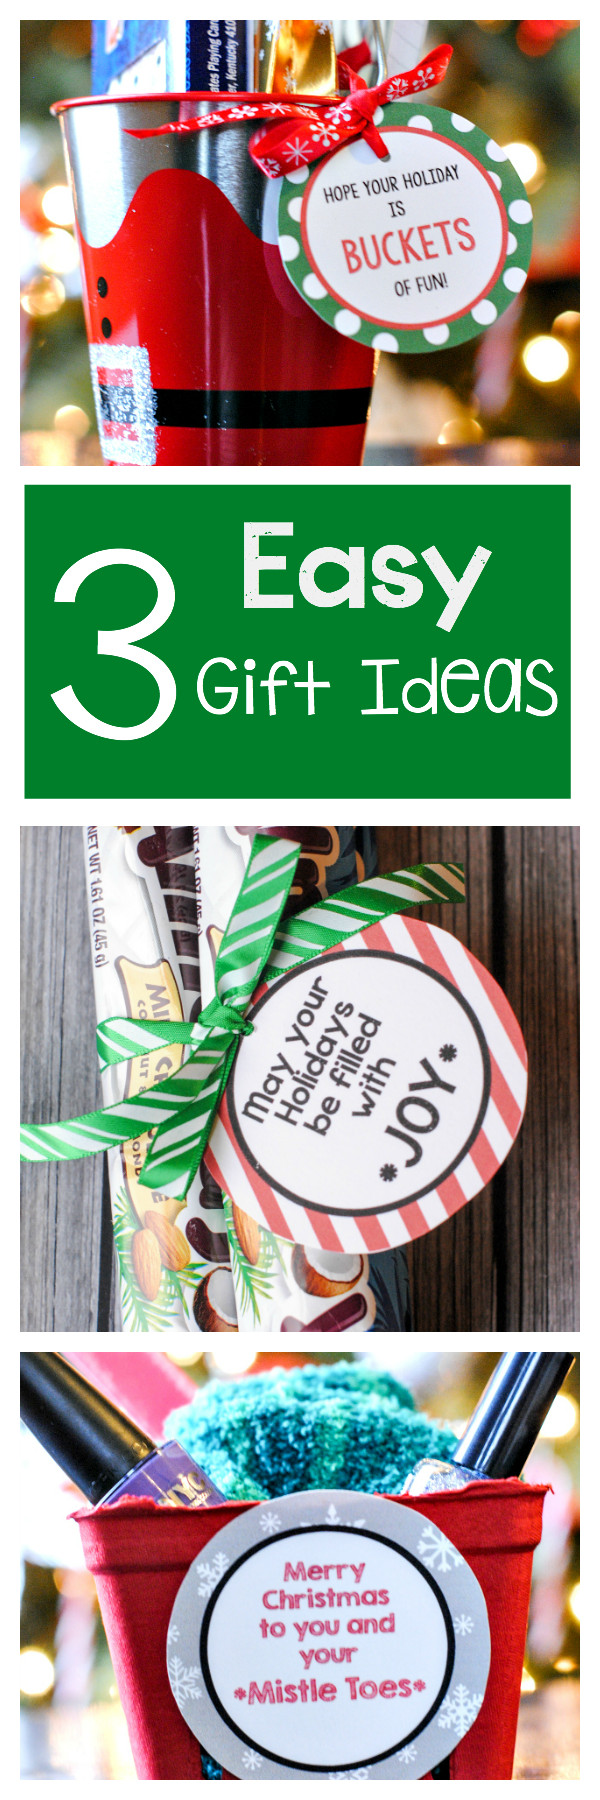 Christmas Gift Ideas For Coworkers
 3 Easy Gifts Ideas for Friends Crazy Little Projects